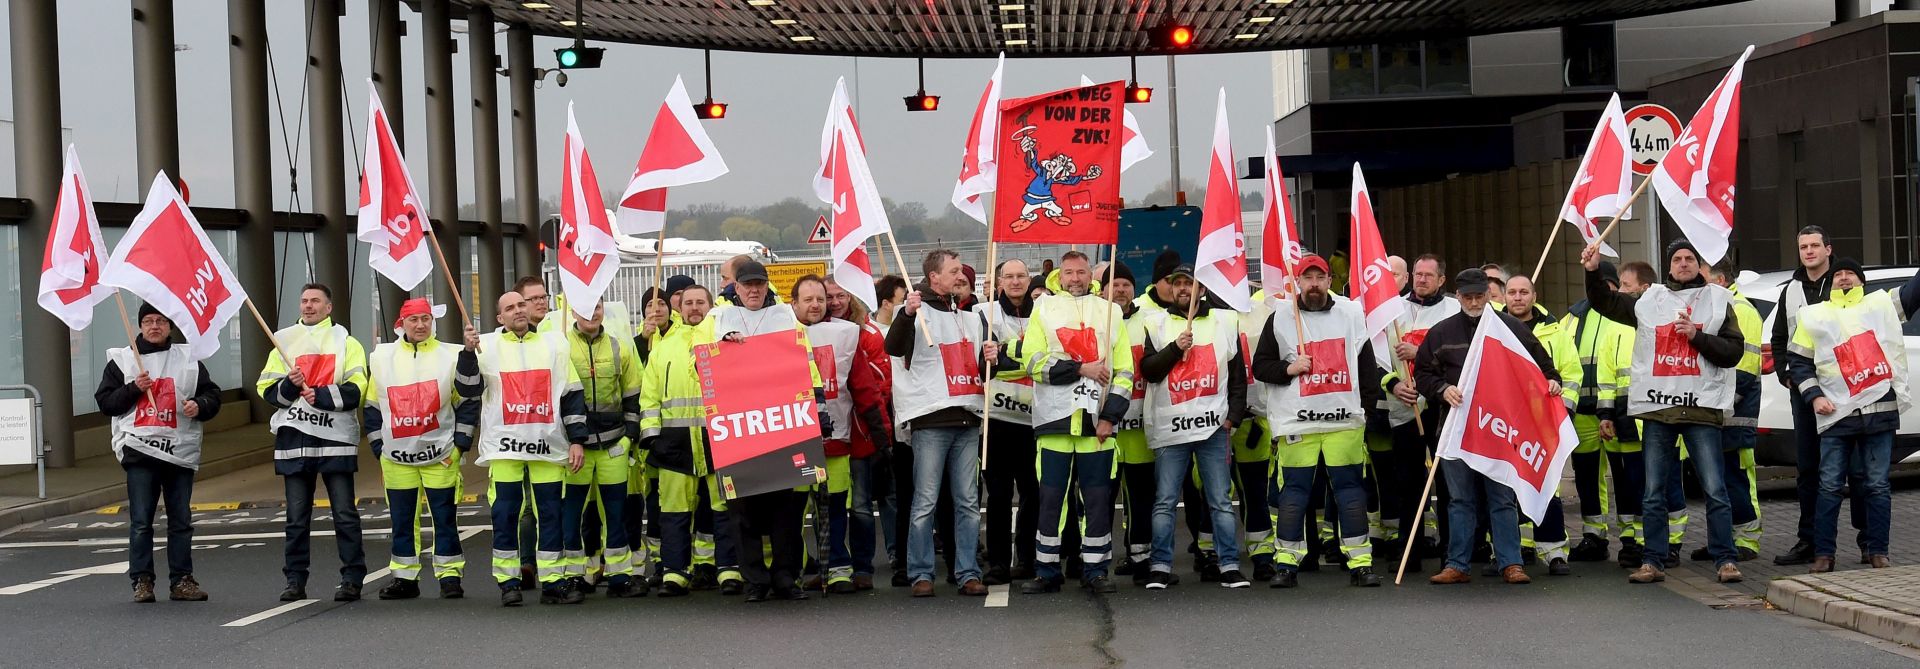 epa05279175 Airport employees carry banners and flags during a rally at the airport of Hanover, in Hanover, Germany, 27 April 2016. German trade union Verdi has called for strikes to increase pressure on employers in the ongoing collective wage negotiations. Verdi is demanding a six-percent pay hike, an additional 100 euro in wages for apprentices and permanent positions upon the completion of apprenticeships.  EPA/HOLGER HOLLEMANN